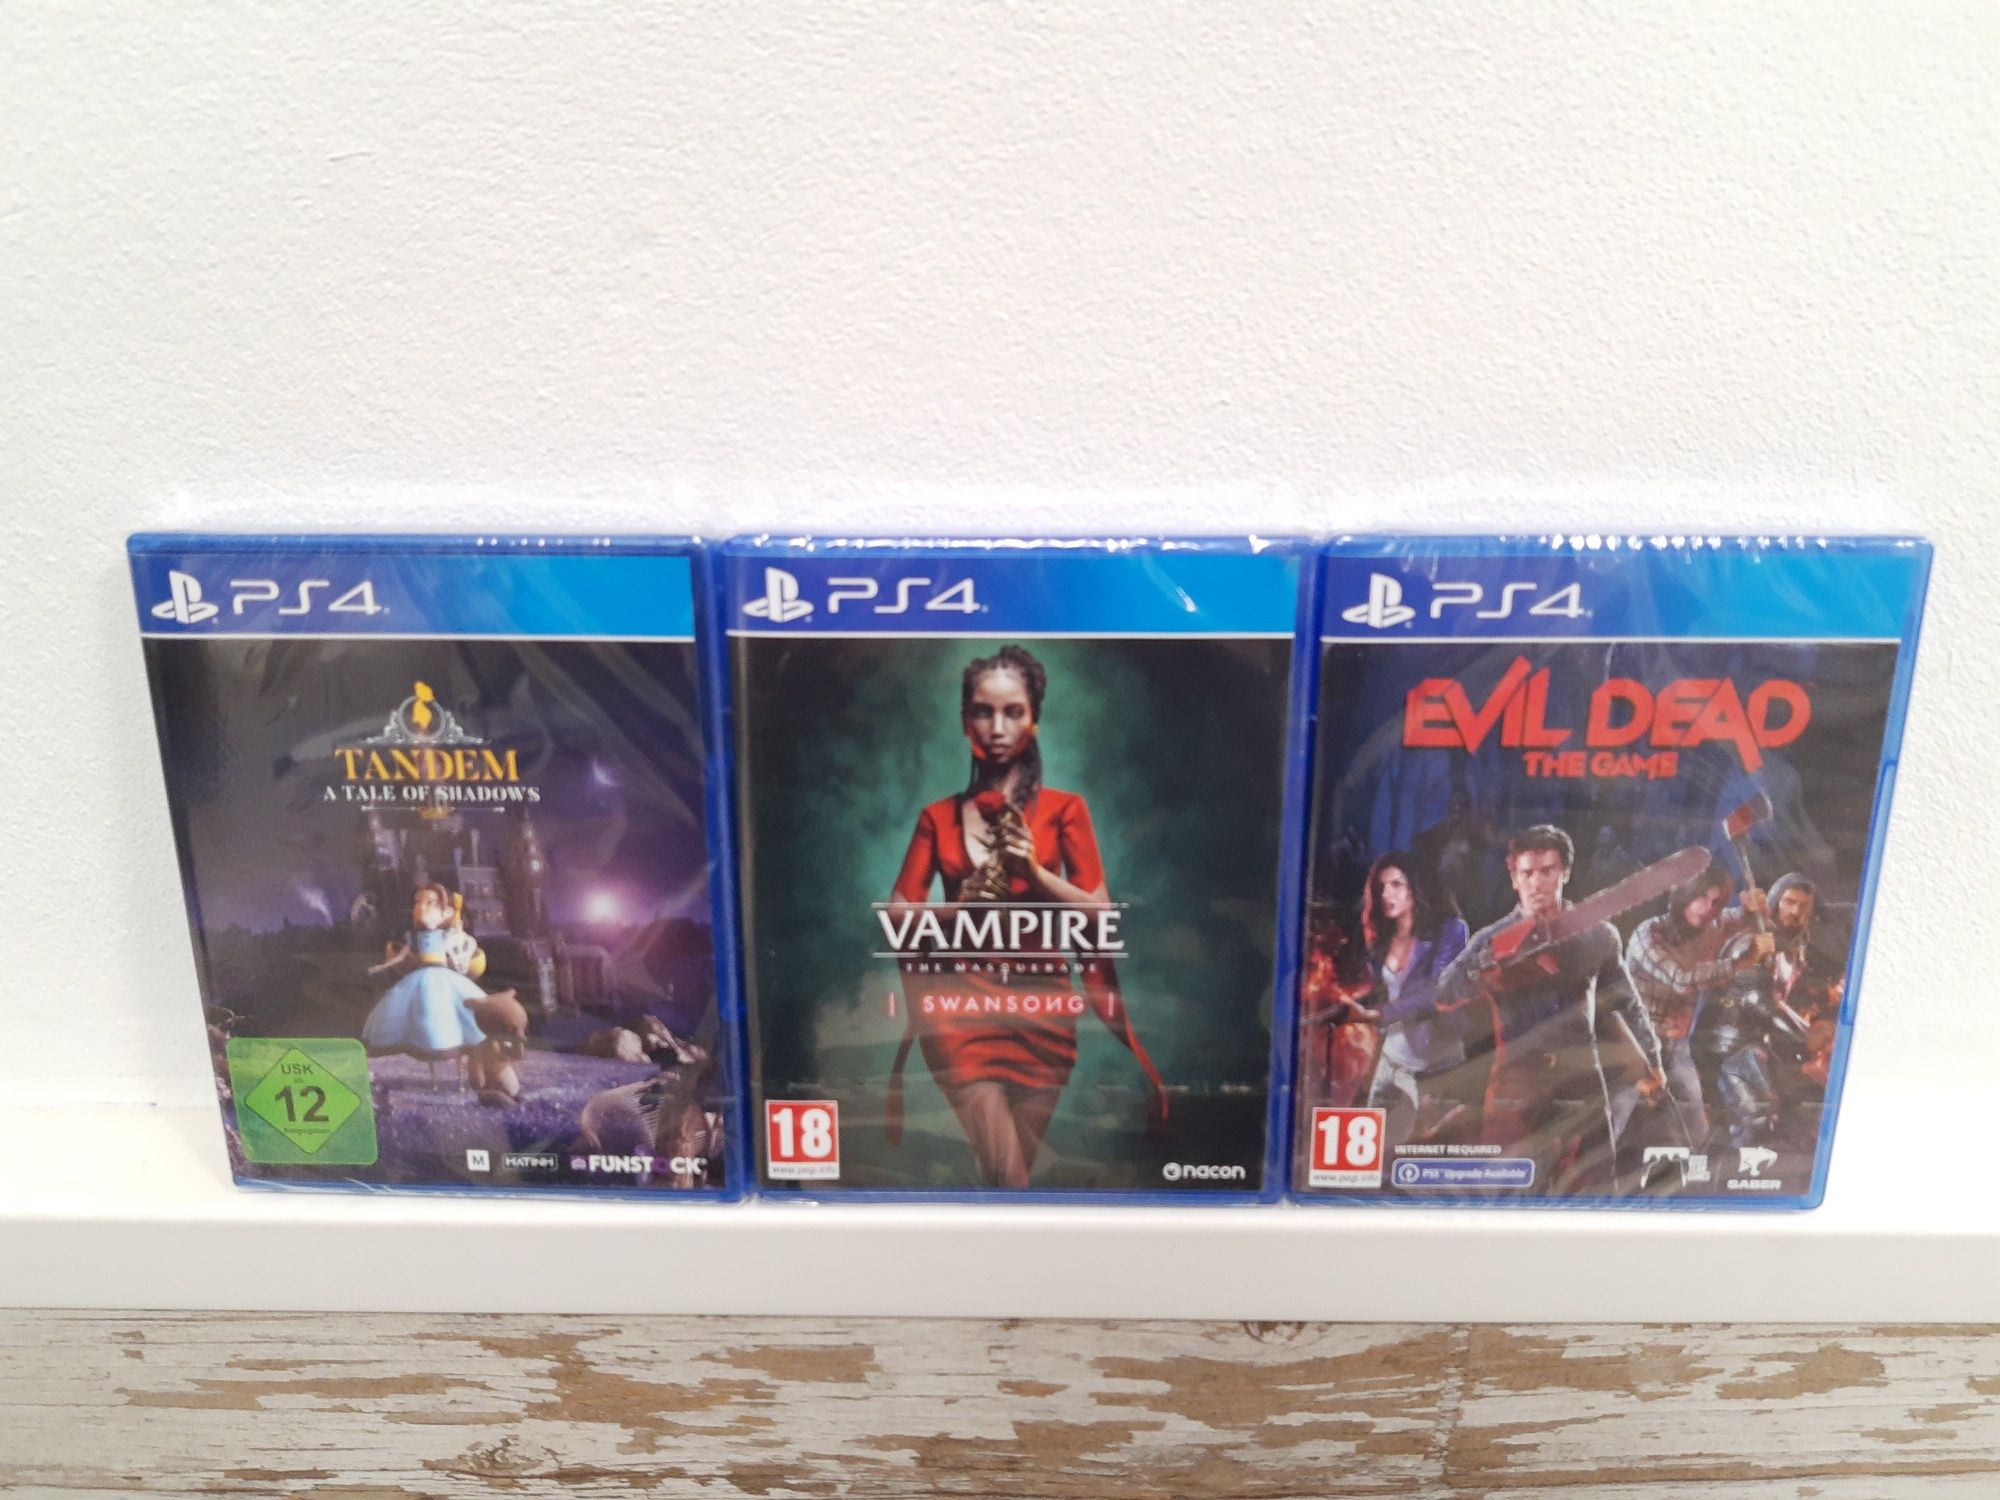 Evil Dead , Vampire Swansong , Tandem a Tale of Shadows PS4